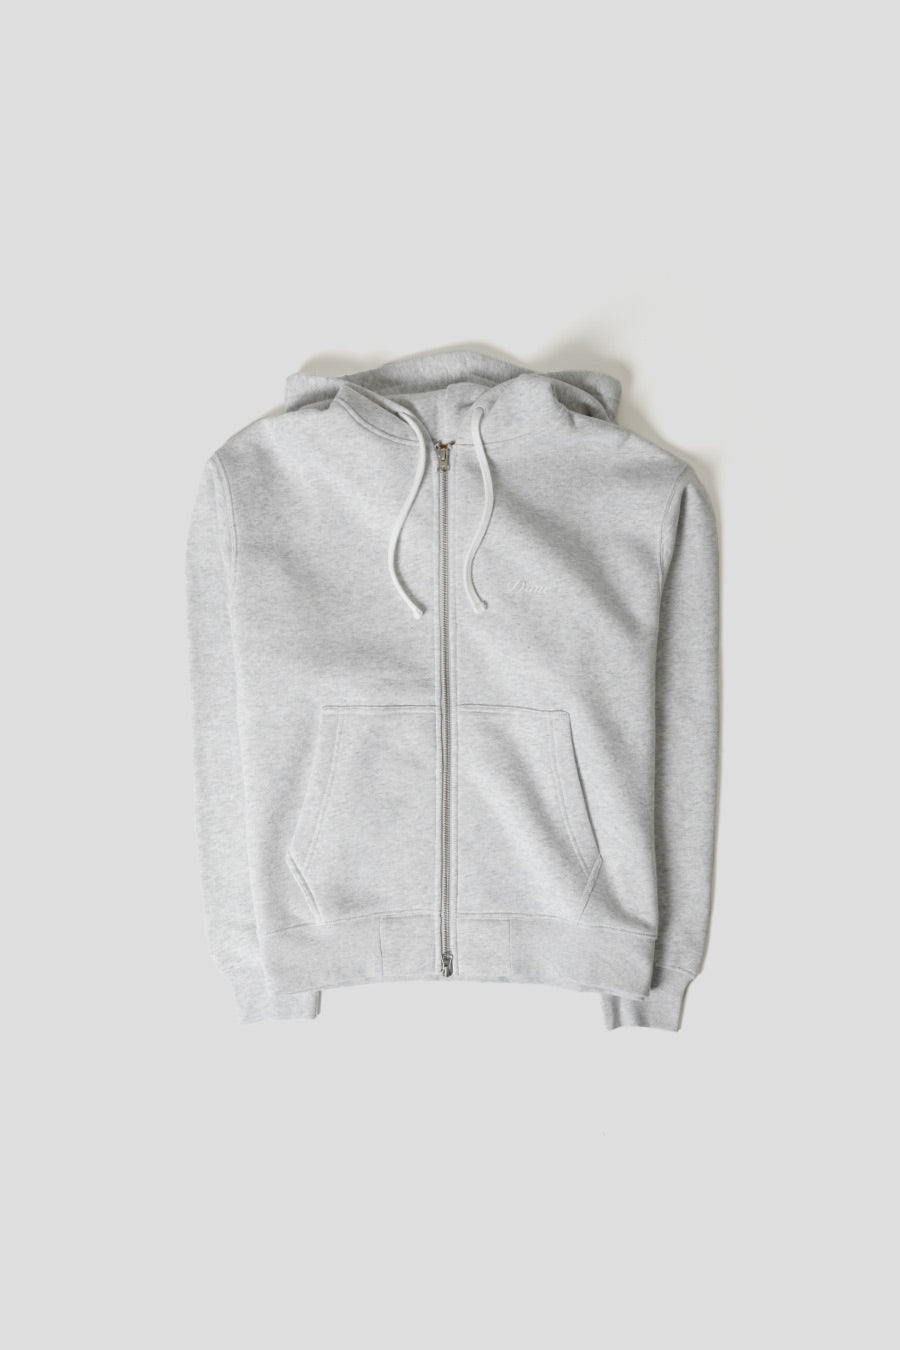 Dime - CHINESE GREY SMALL LOGO ZIP CURSIVE HOODIE - LE LABO STORE